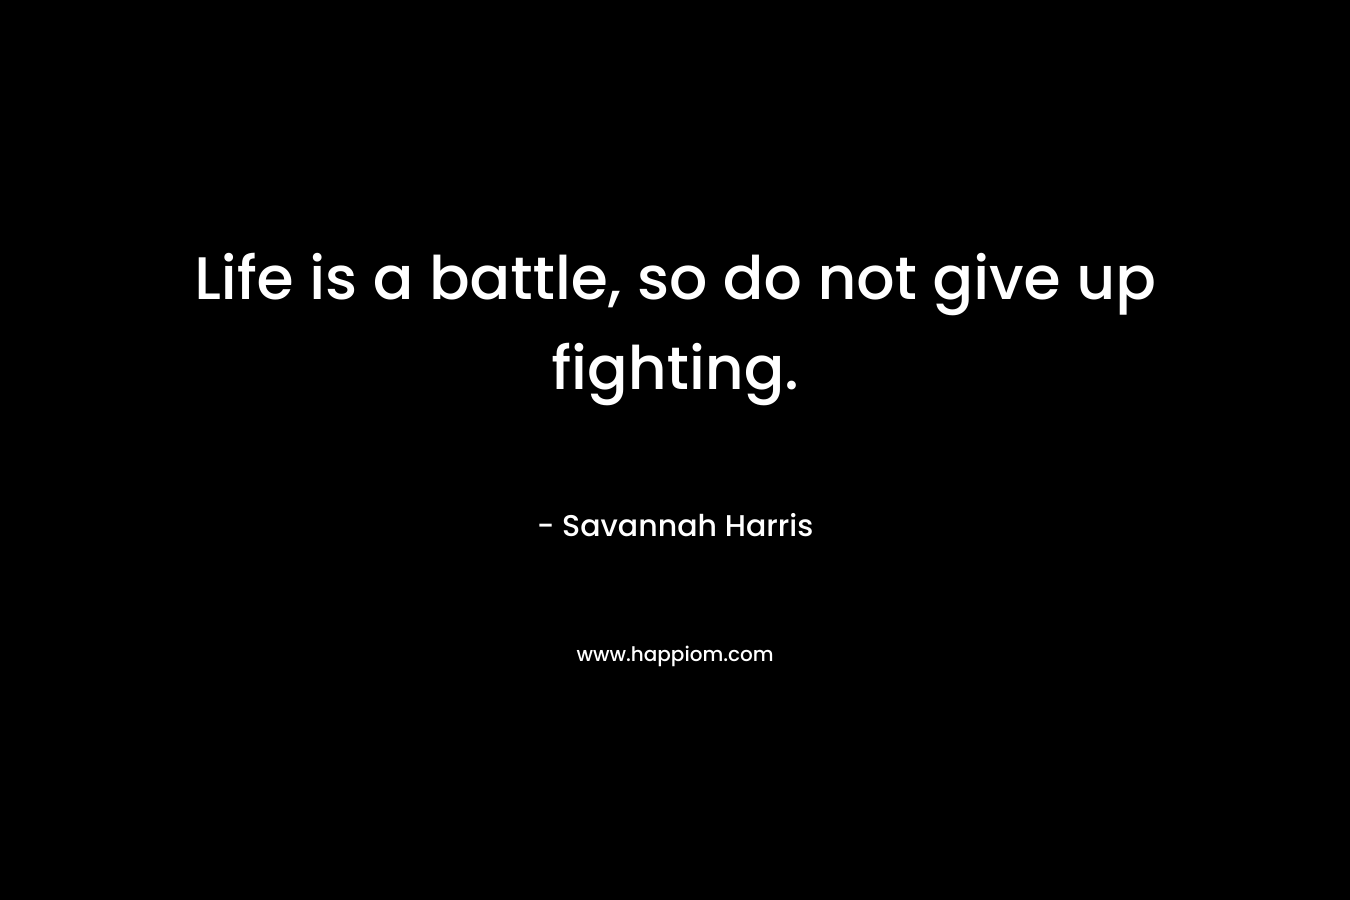 Life is a battle, so do not give up fighting.